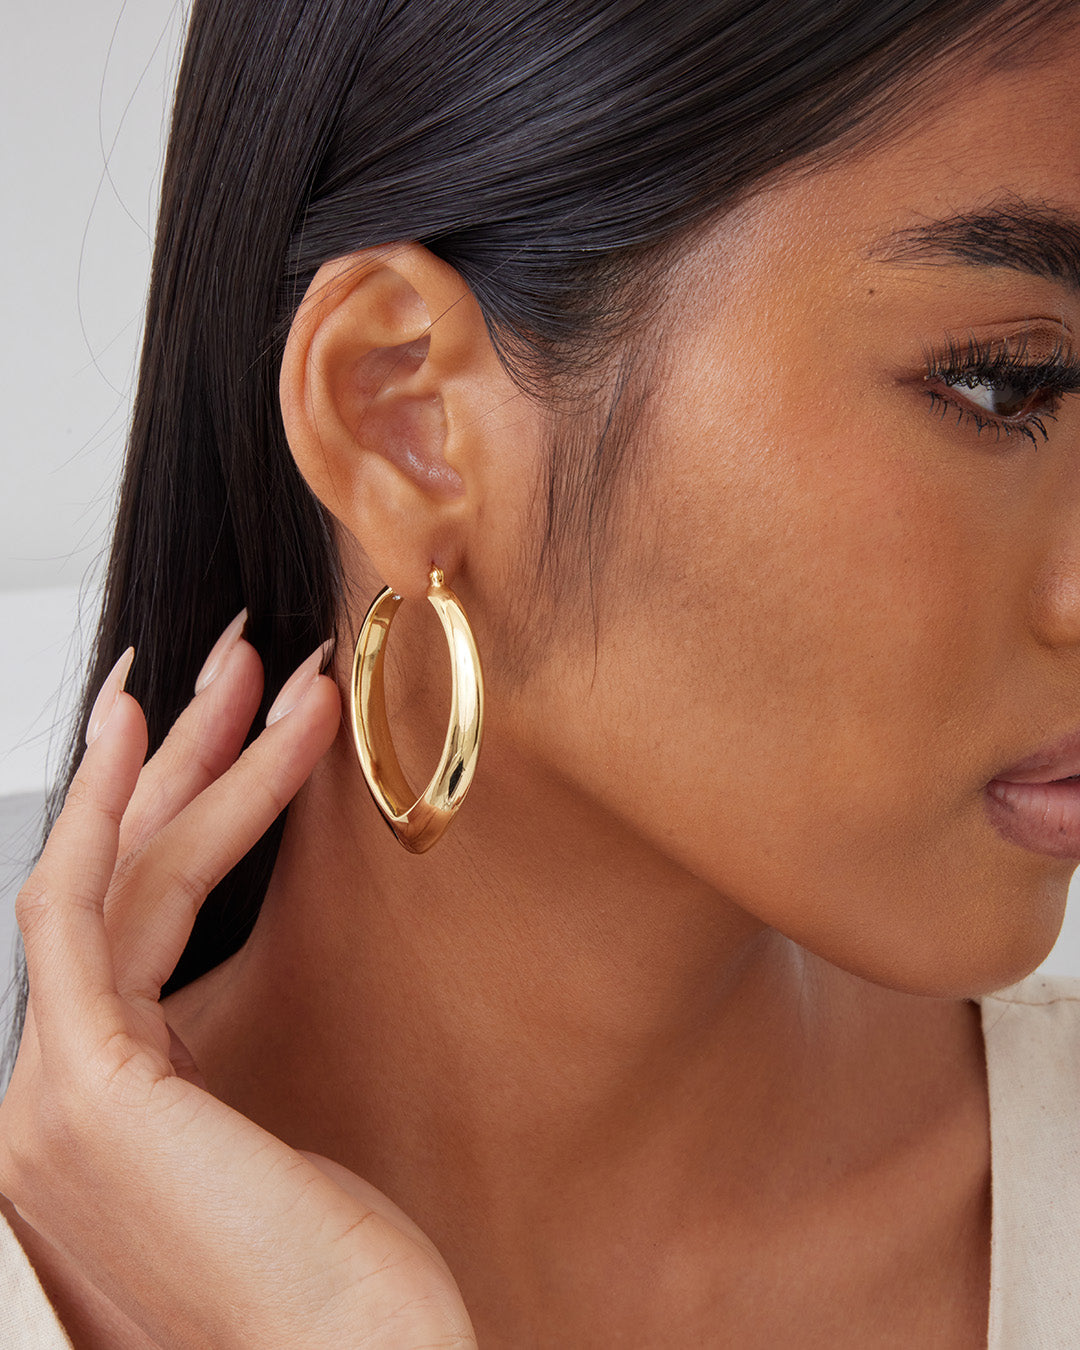 This is the product picture of oversized tear drop shape design hoop earrings plated in gold in sterling silver material